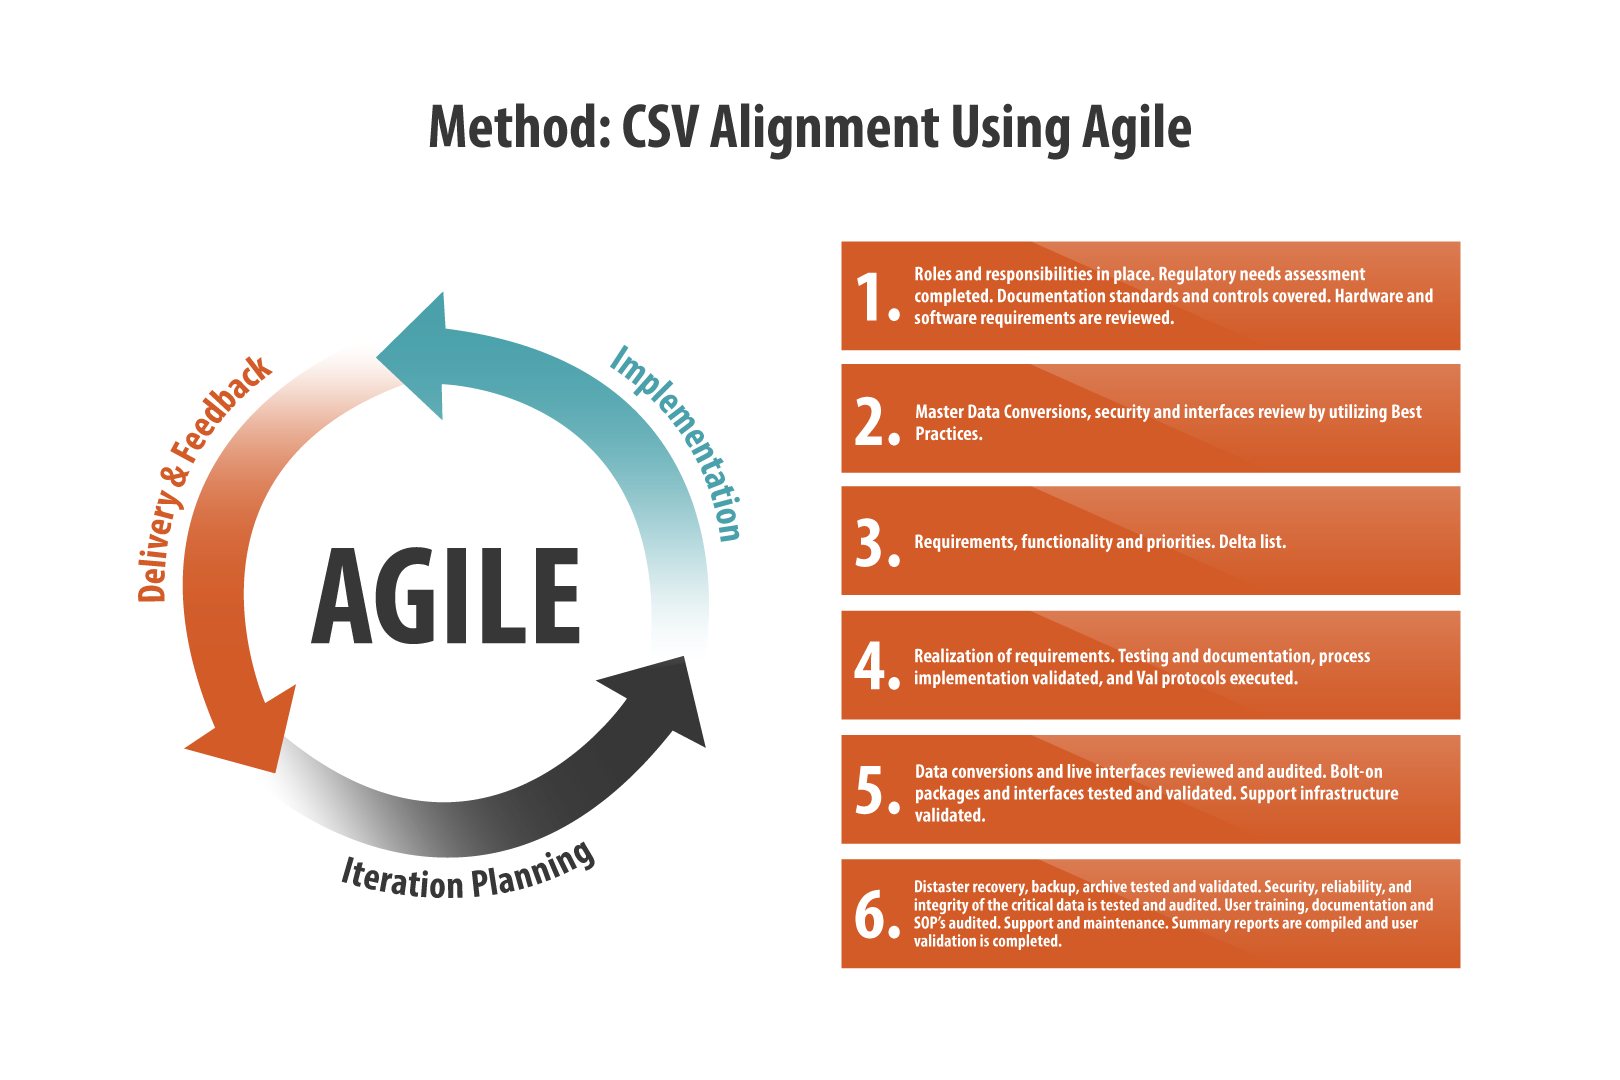 Mehotd of Computer System Validation Alignment using Agile. 3 Steps including delivery & feedback, implementation, and iteration planning.